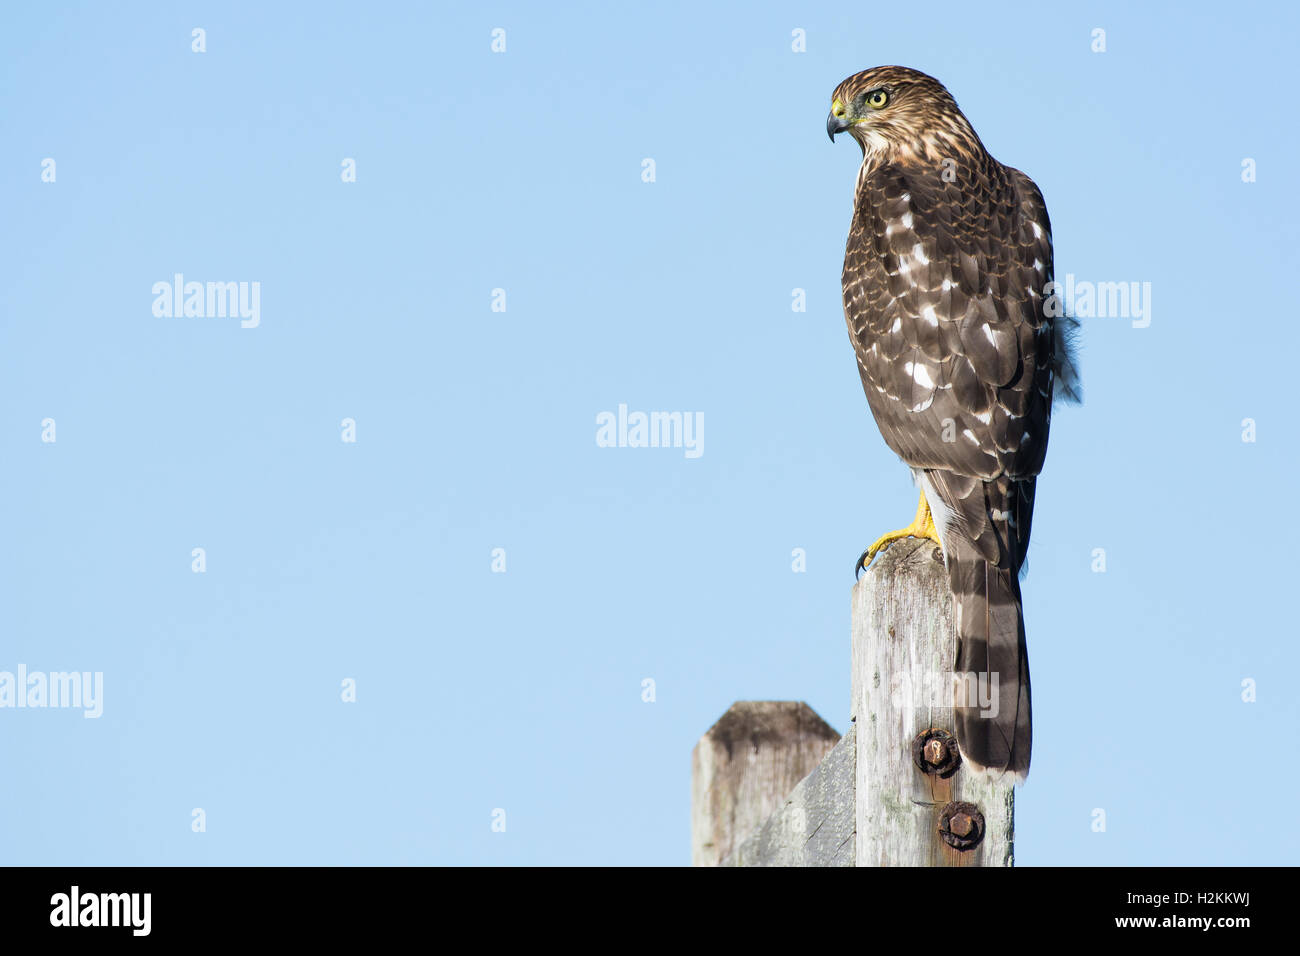 A Cooper's hawk (Accipiter cooperii) perched on a post in the Northeast ...